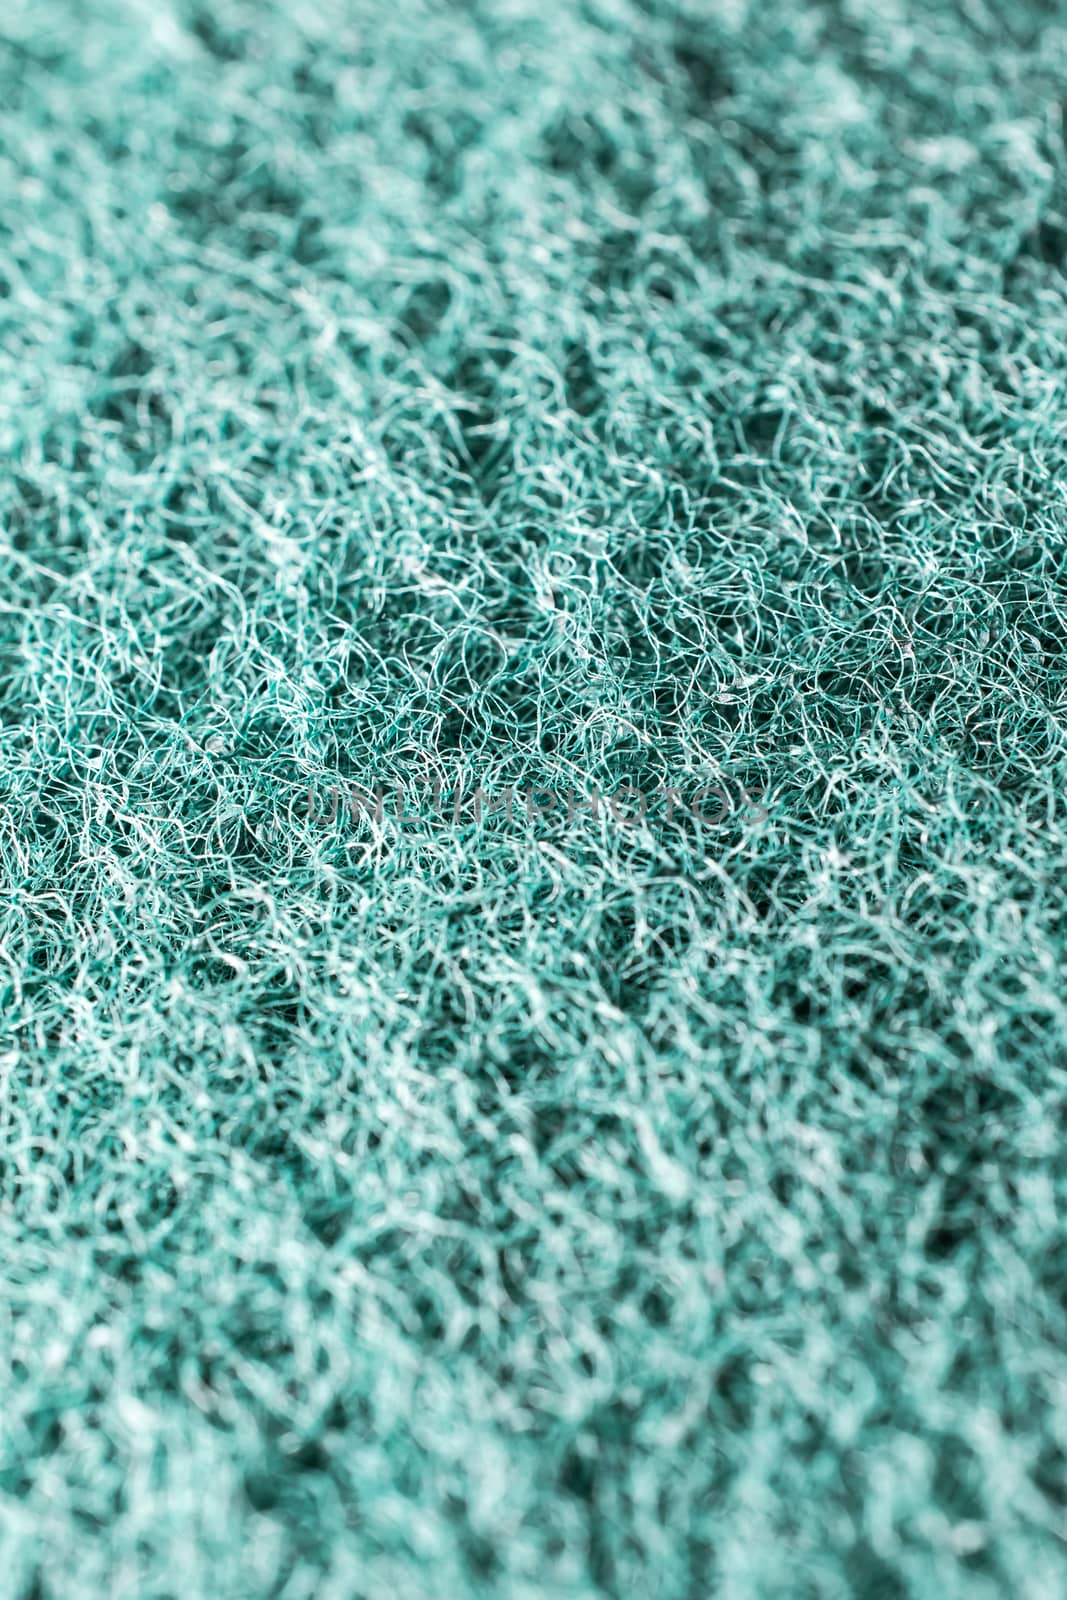 Close-up of a green cleaning sponge surface as a backdrop background texture